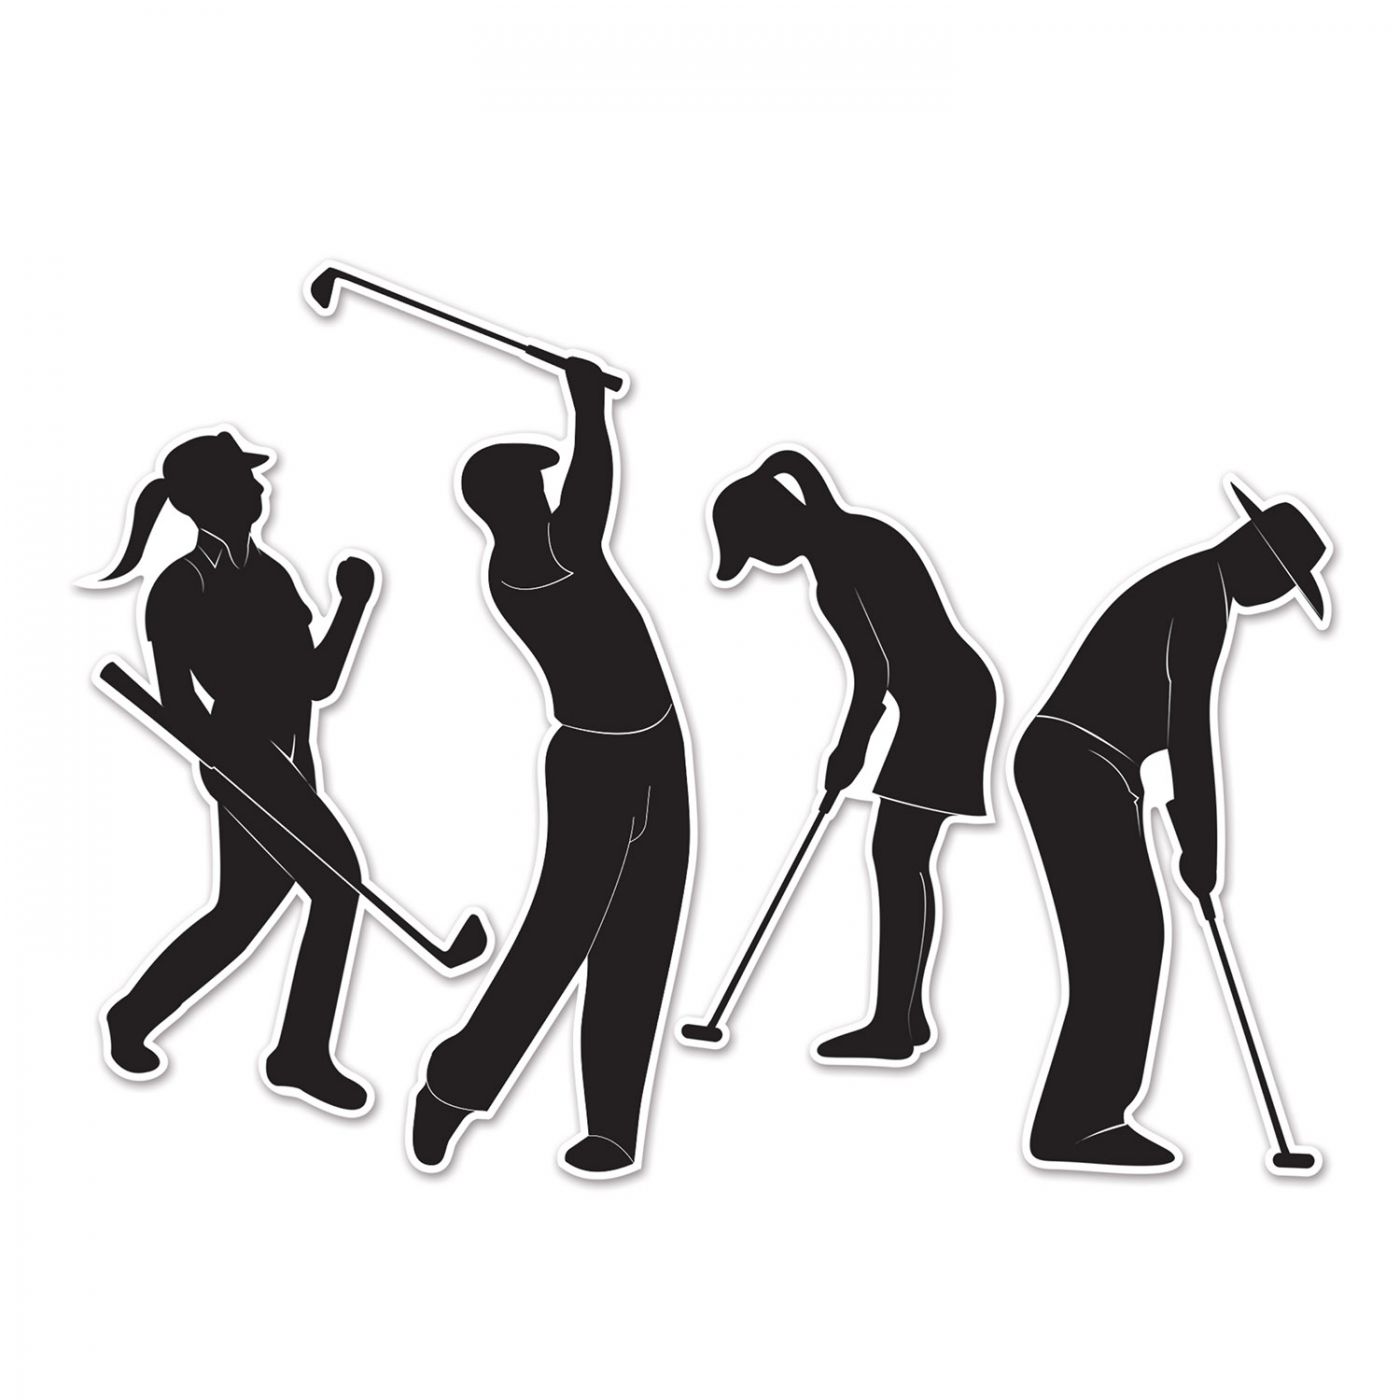 Golf Player Silhouettes (12) image